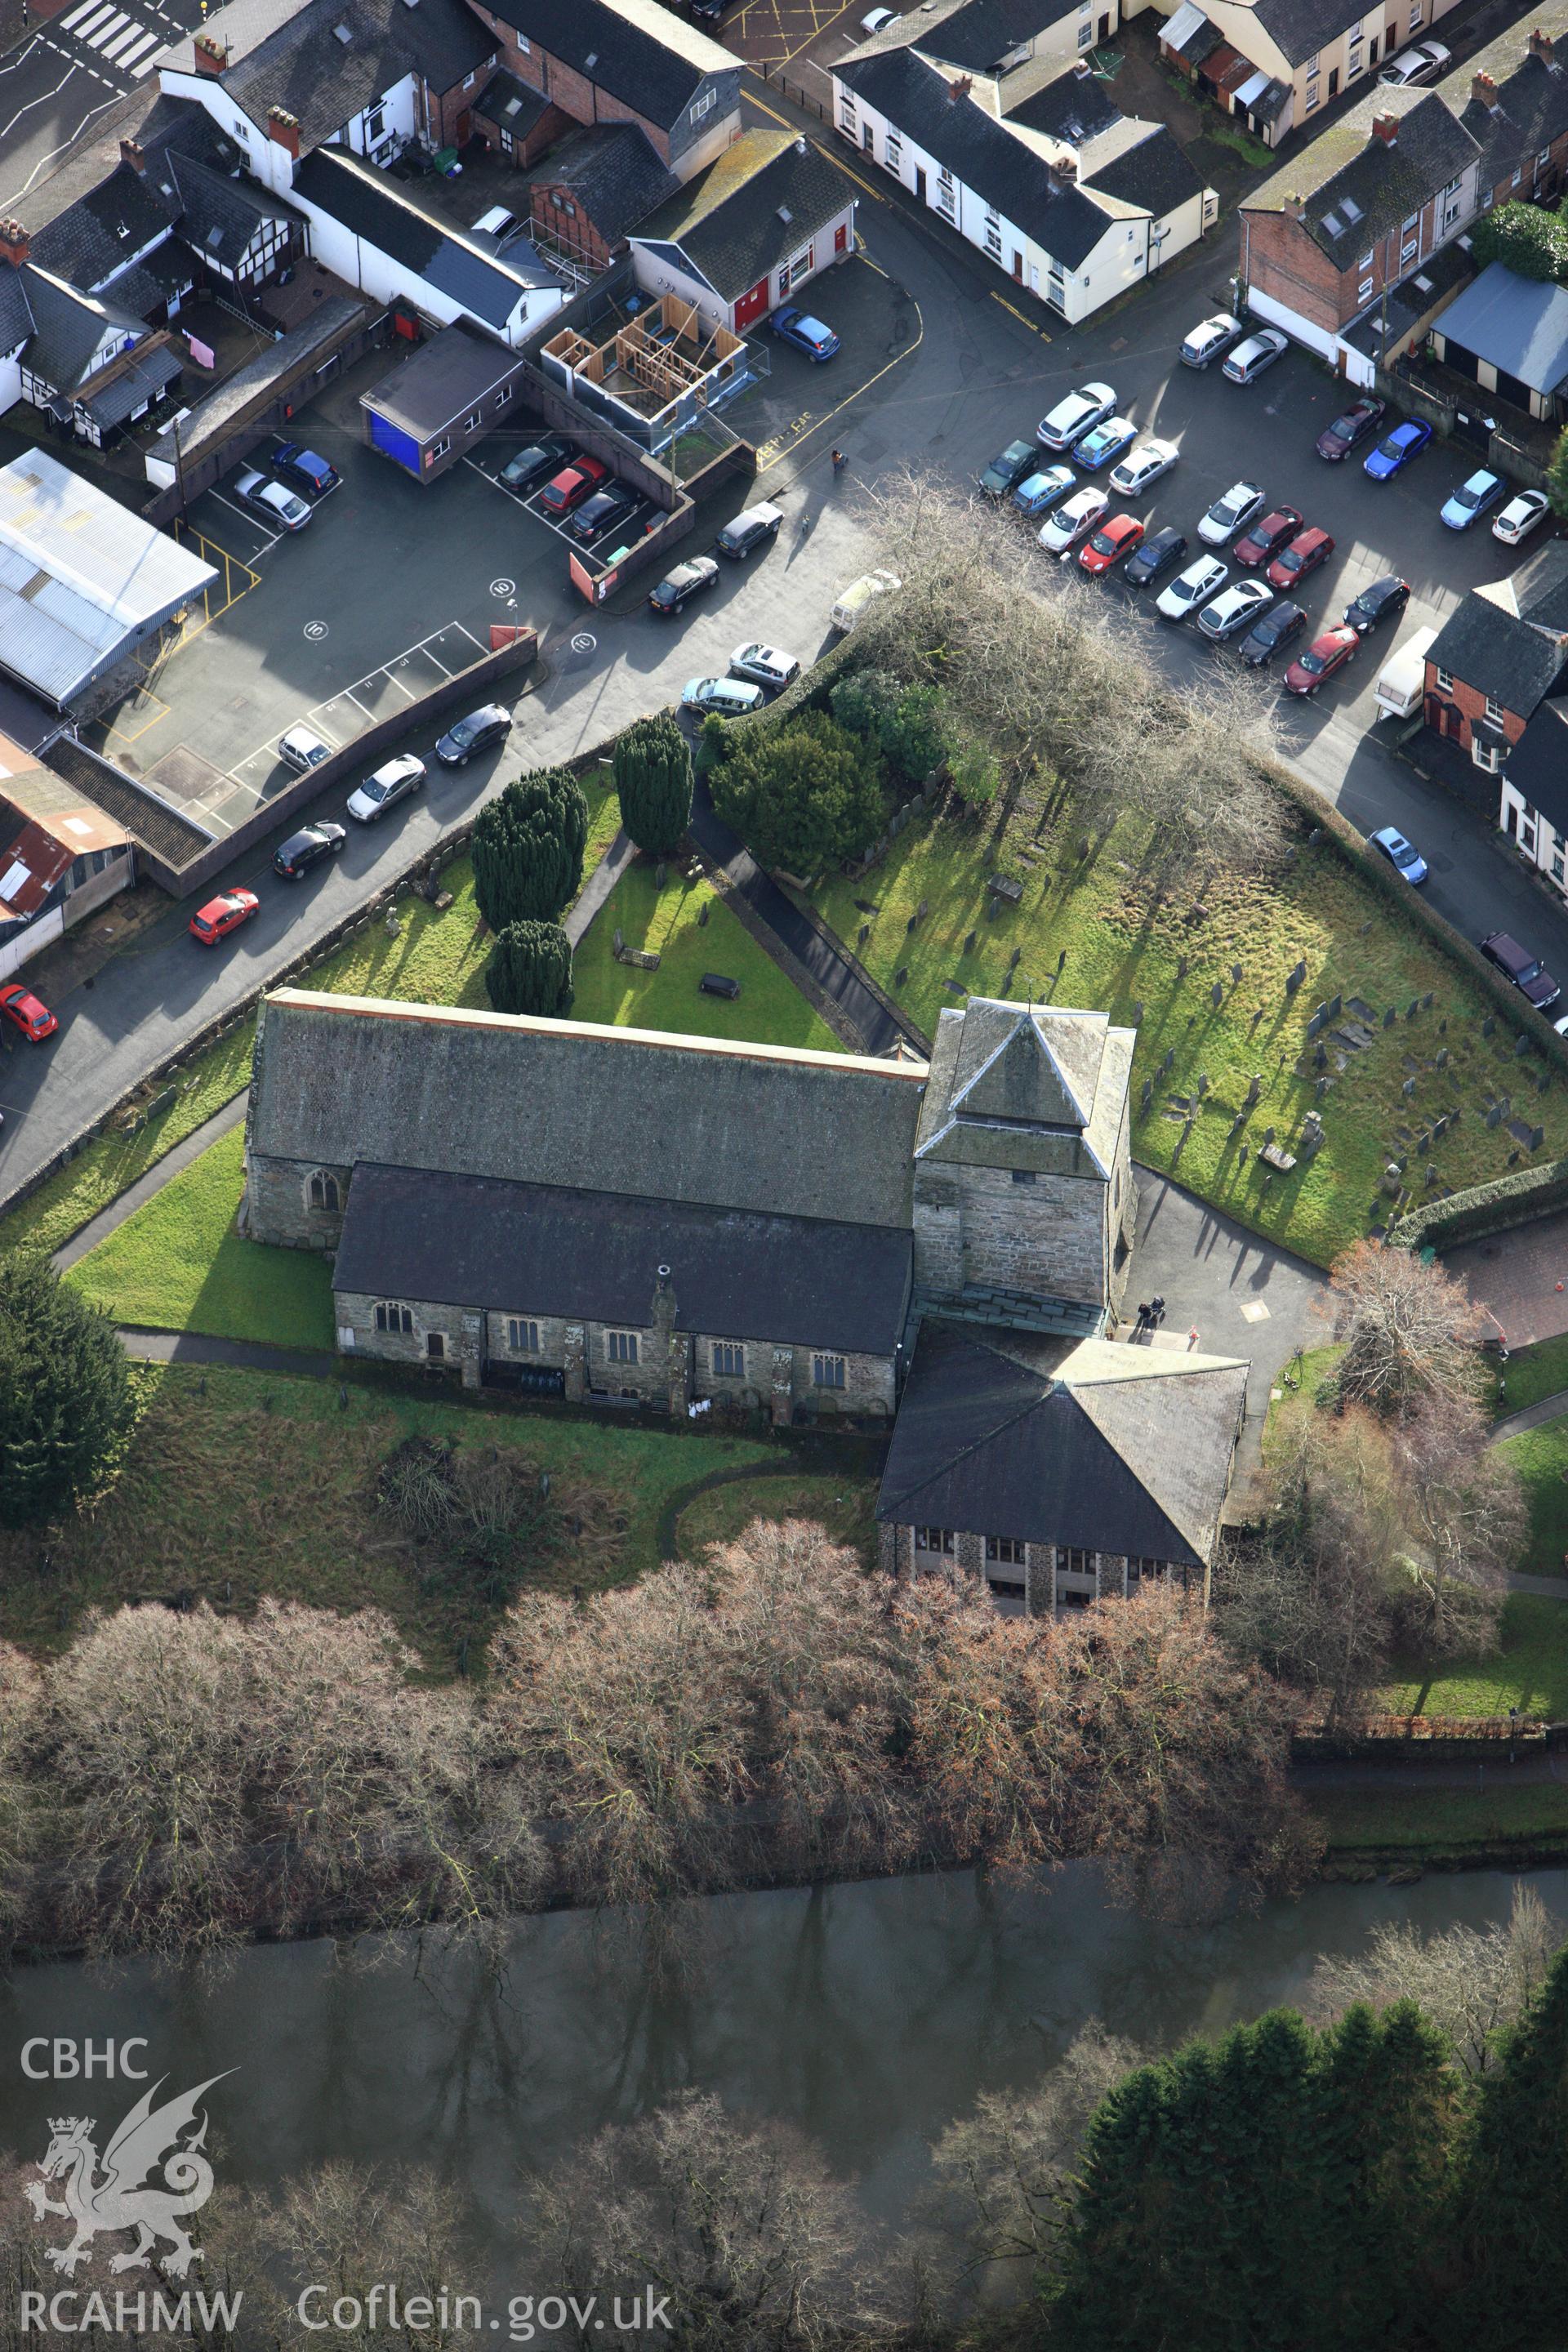 RCAHMW colour oblique aerial photograph of St Idloes' Church, Llanidloes. Taken on 10 December 2009 by Toby Driver